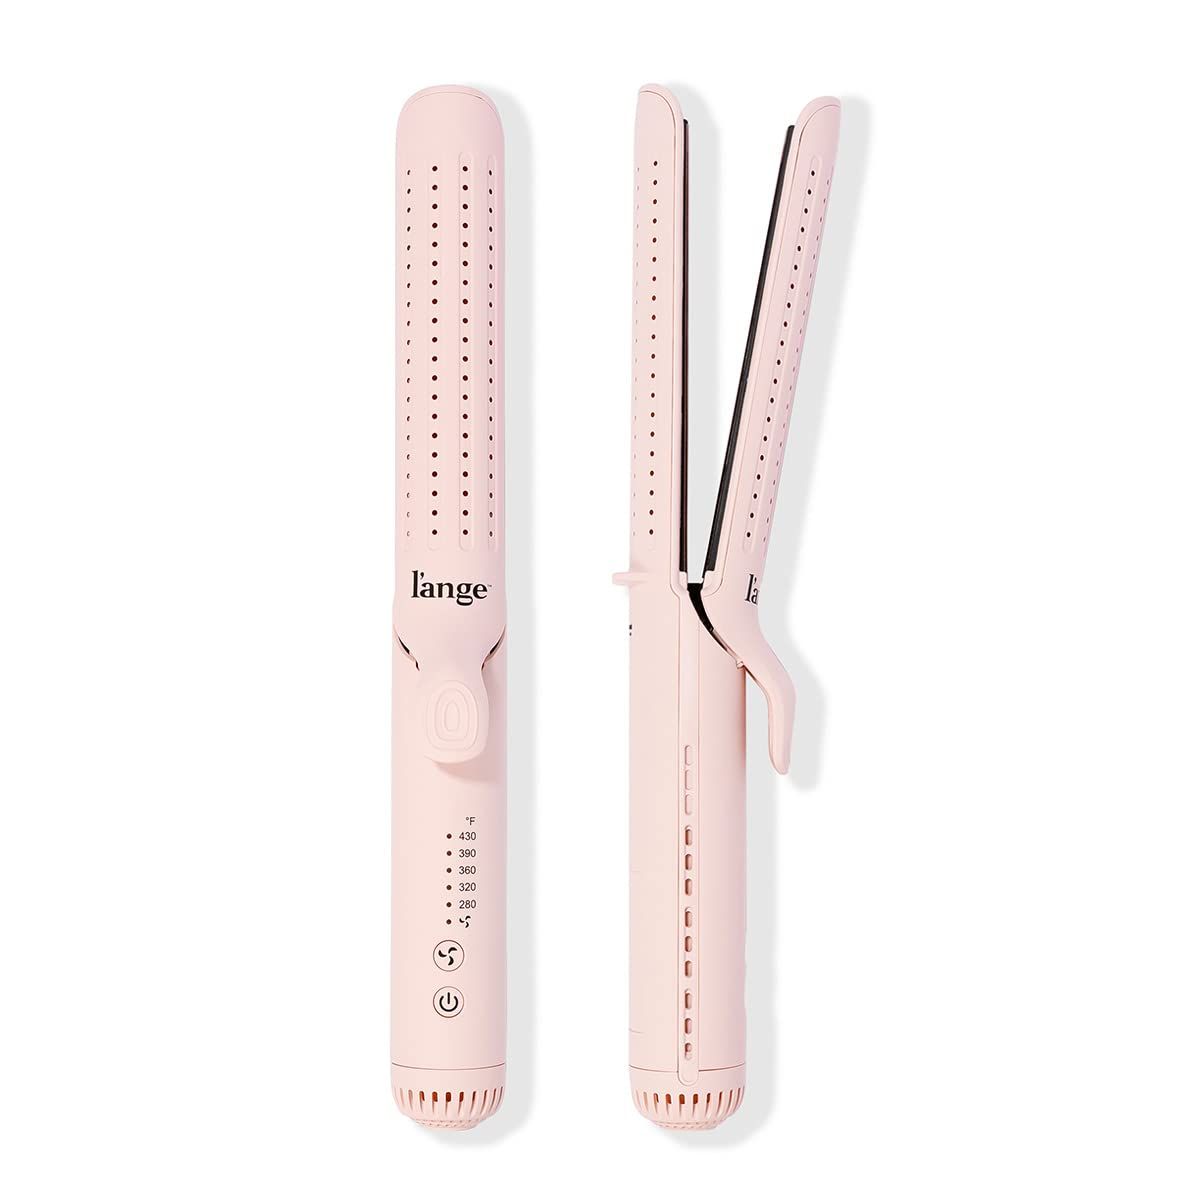 L'ANGE HAIR Le Duo Grande 360° Airflow Styler | 2-in-1 Curling Wand & Titanium Flat Iron Hair Straightener | Professional Hair Curler with Cooling Air Vents to Lock in Style | Adjustable Temp | Amazon (US)